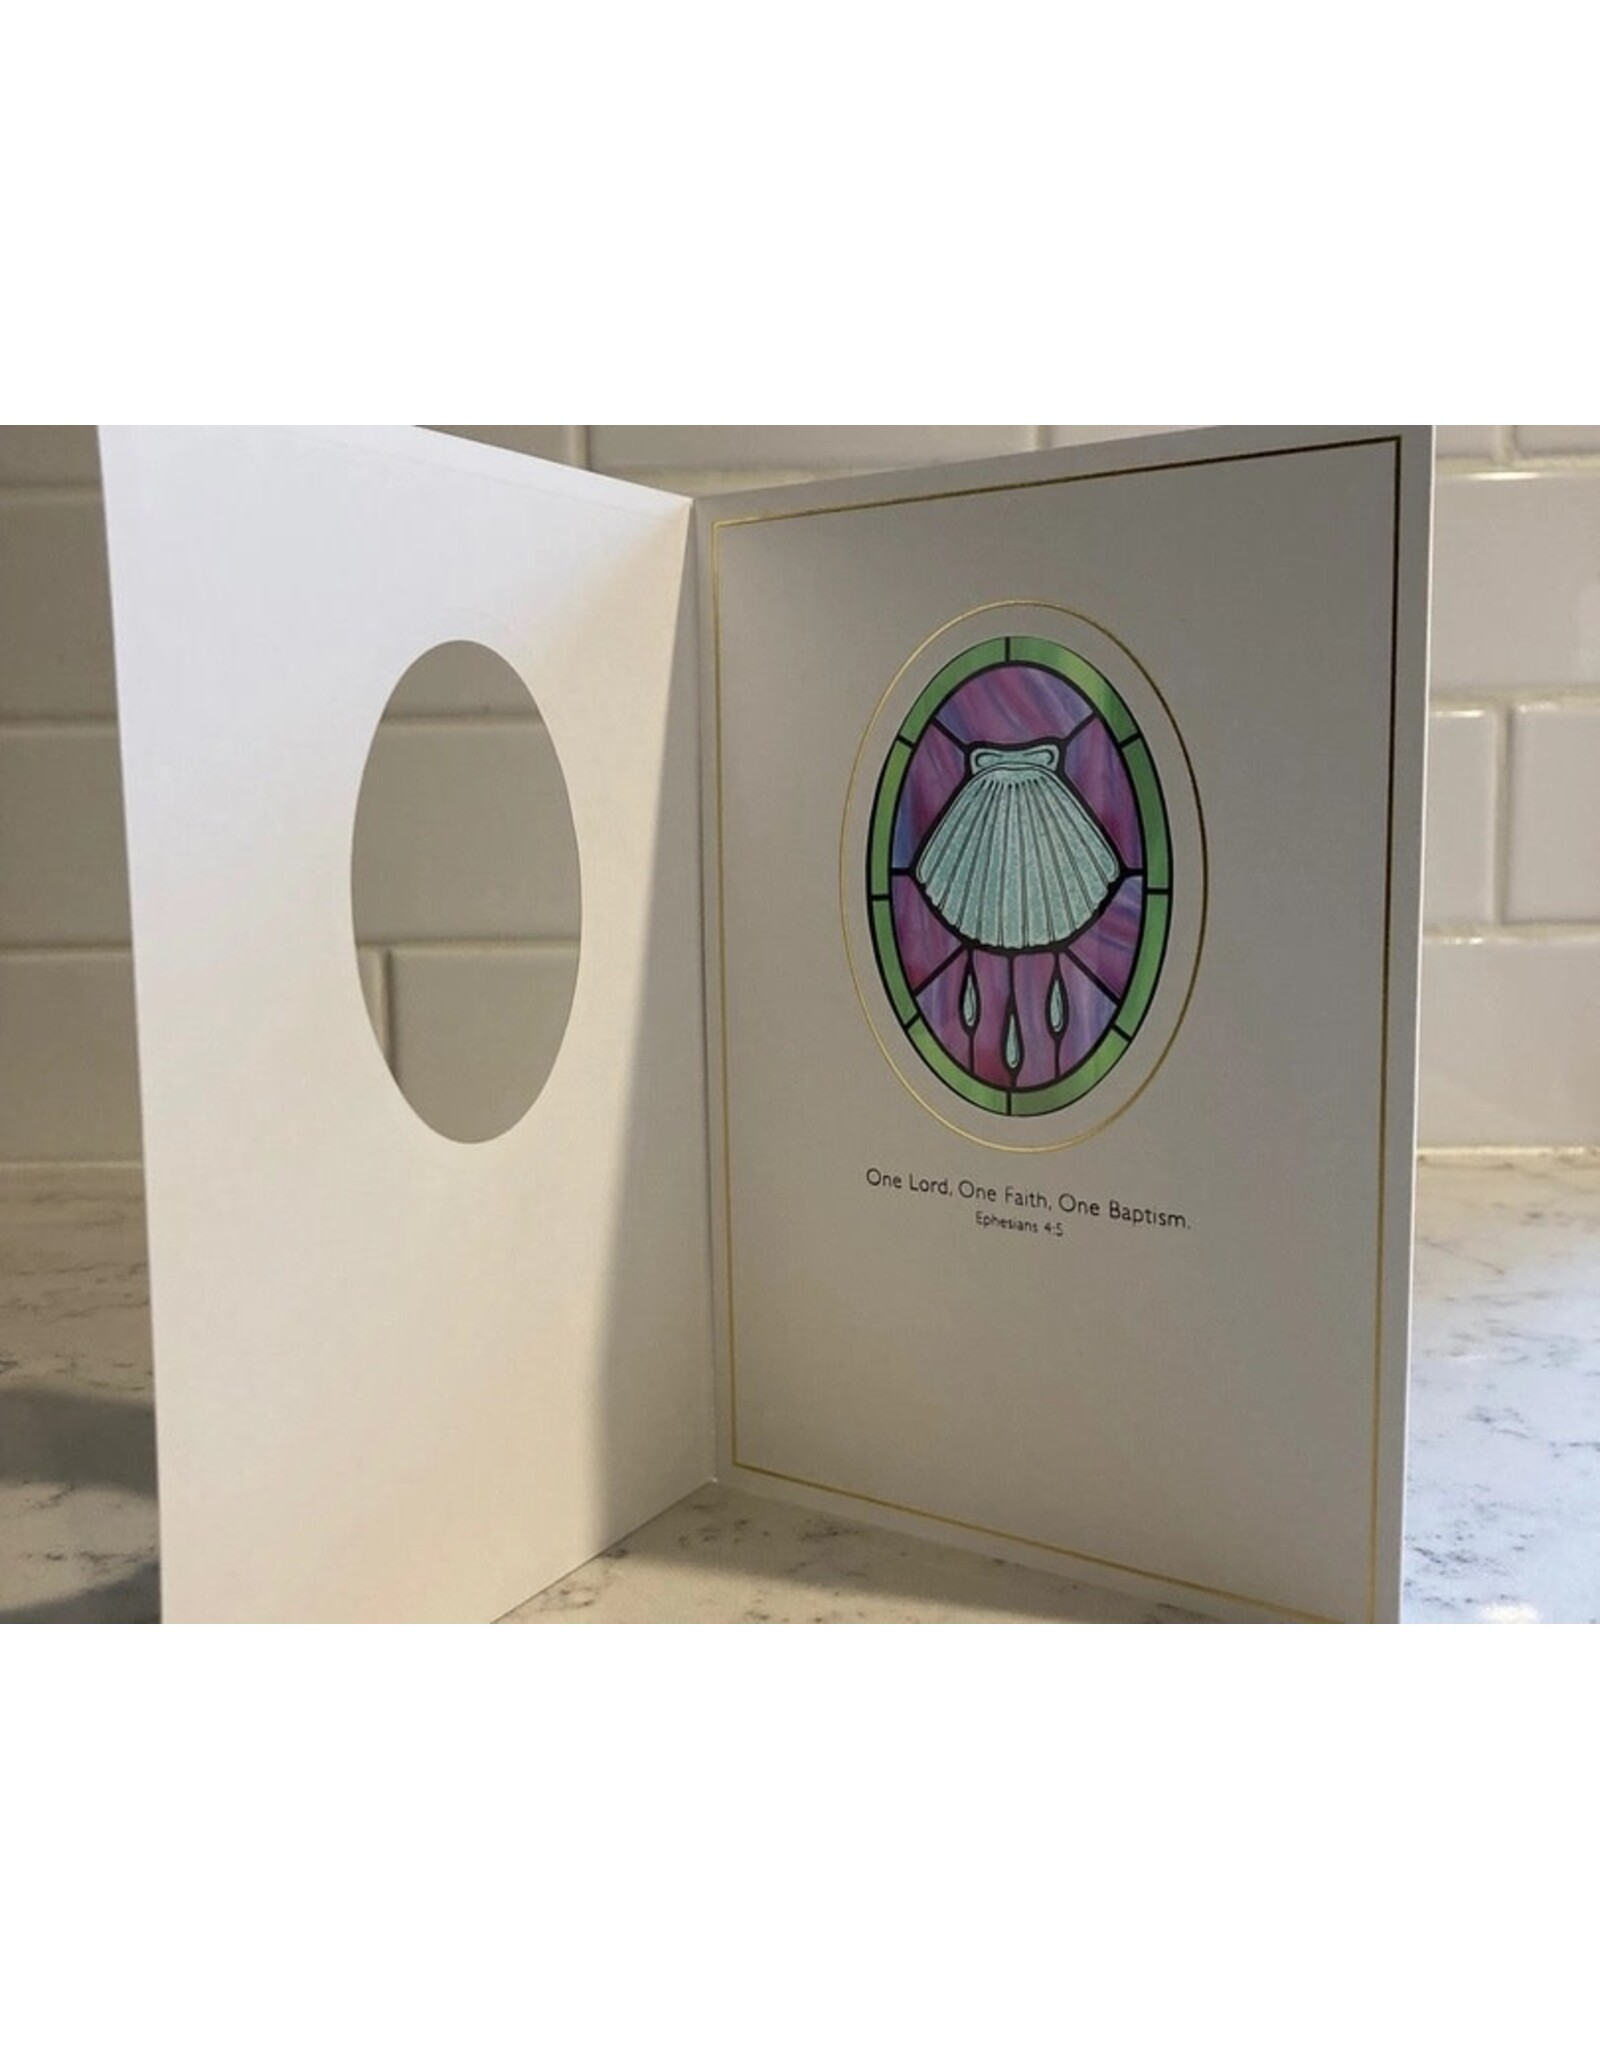 Bright Greetings Baptism shell suncatcher greeting card with scripture